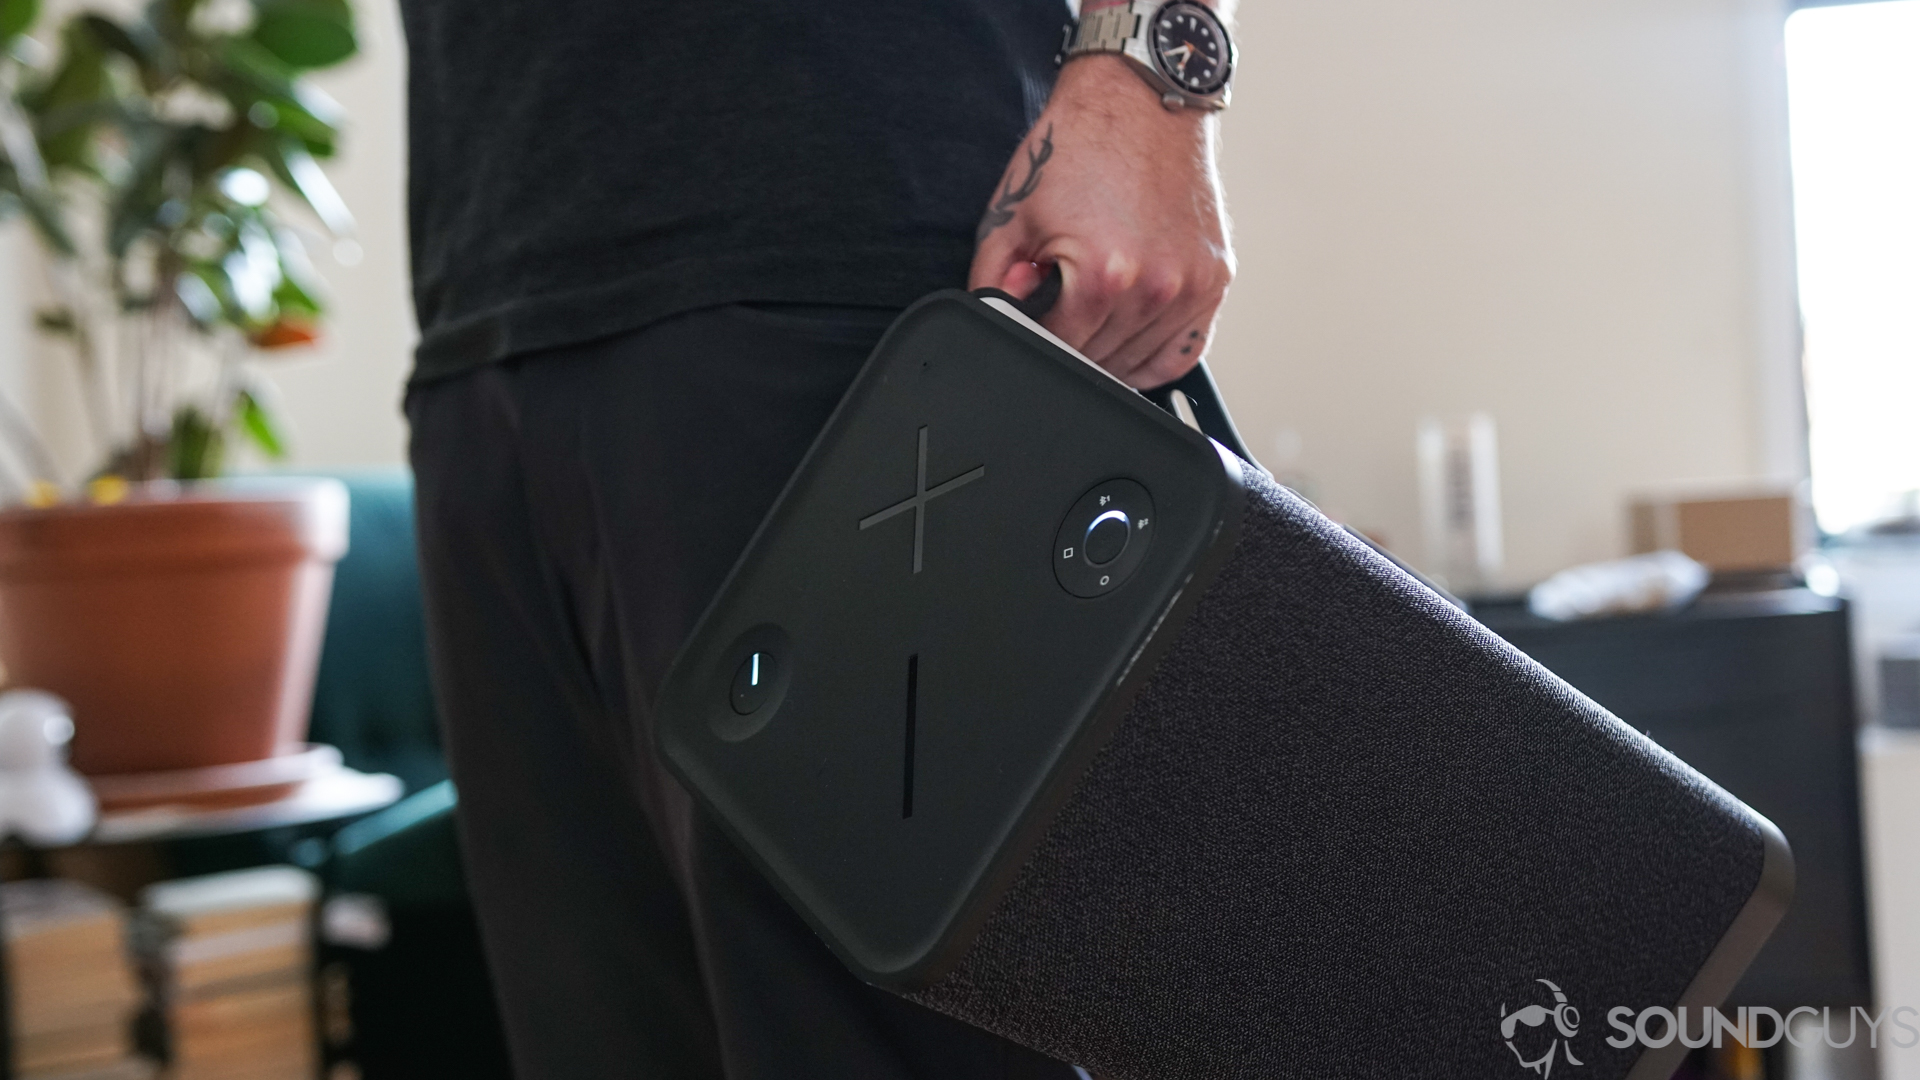 A man carries the UE Hyperboom portable bluetooth speaker across a living room.